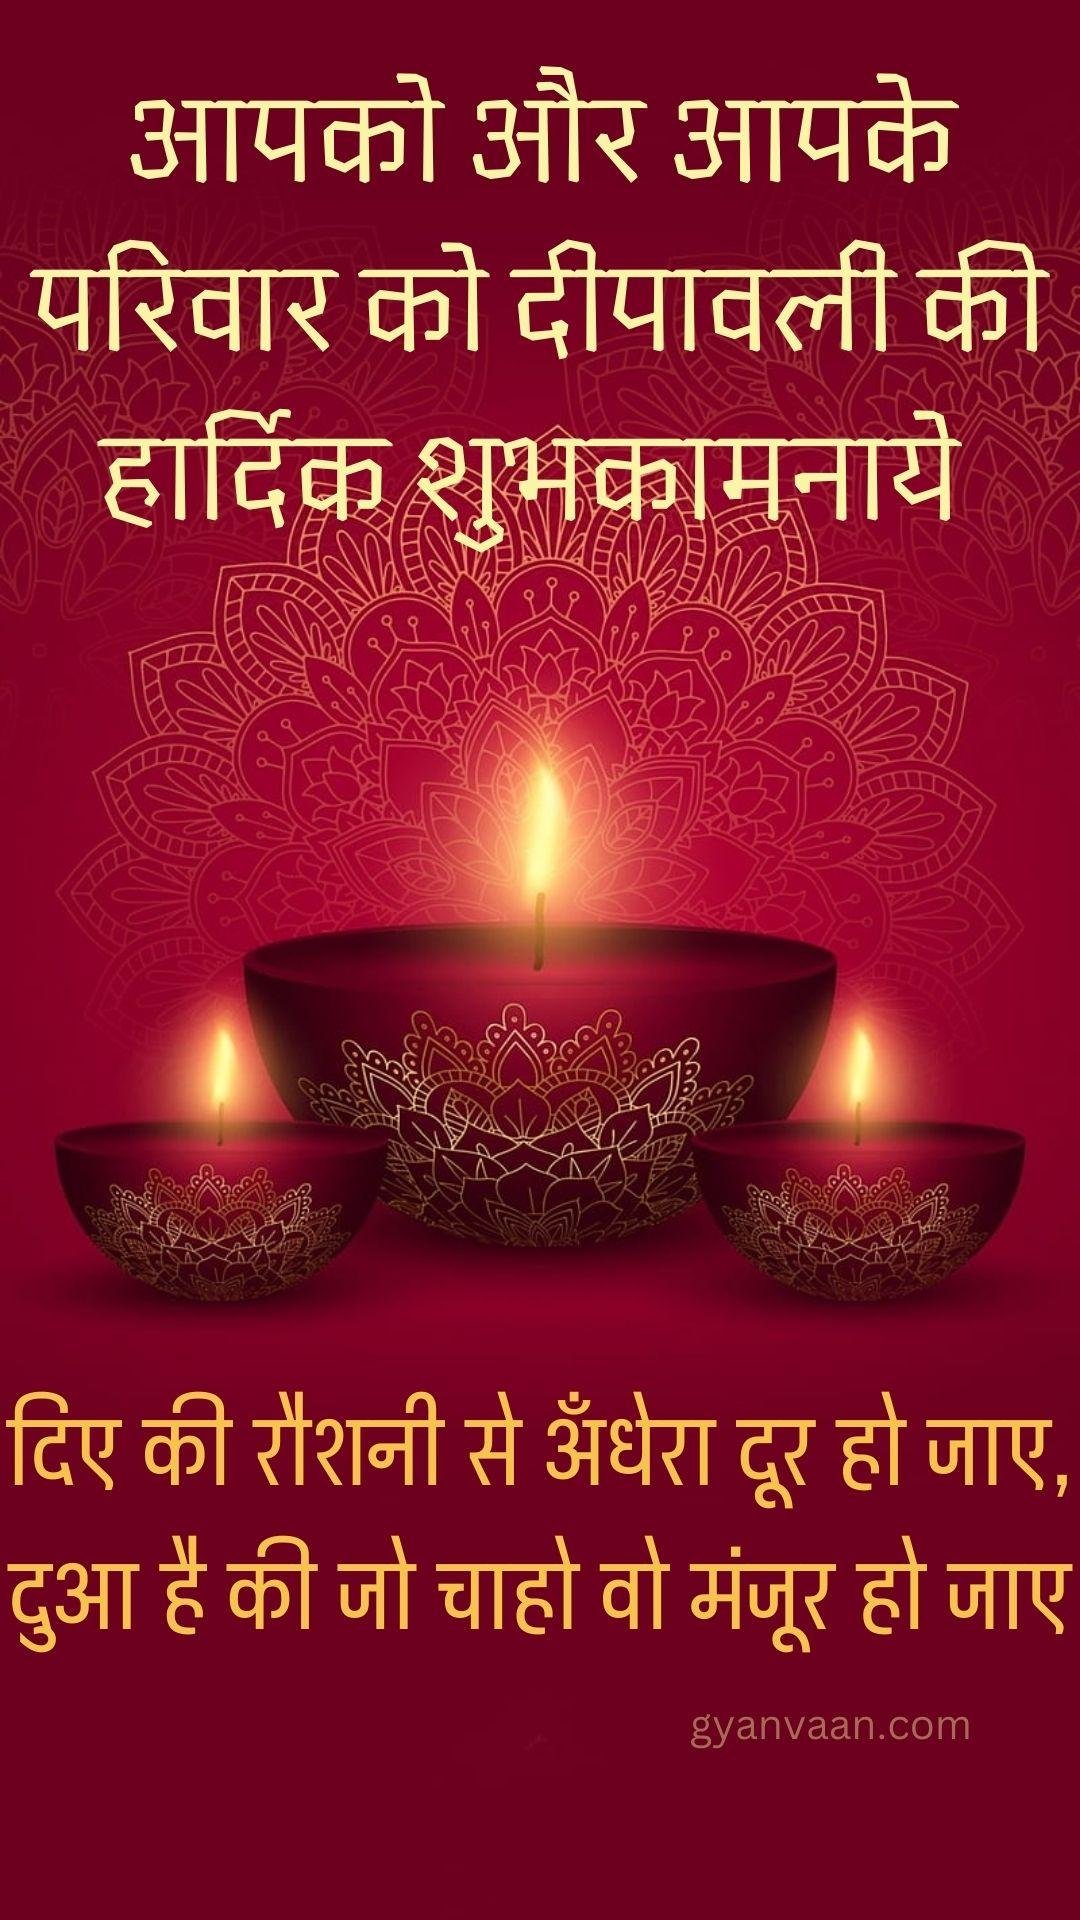 Diwali Quotes In Hindi With Wishes13 - Diwali Quotes In Hindi